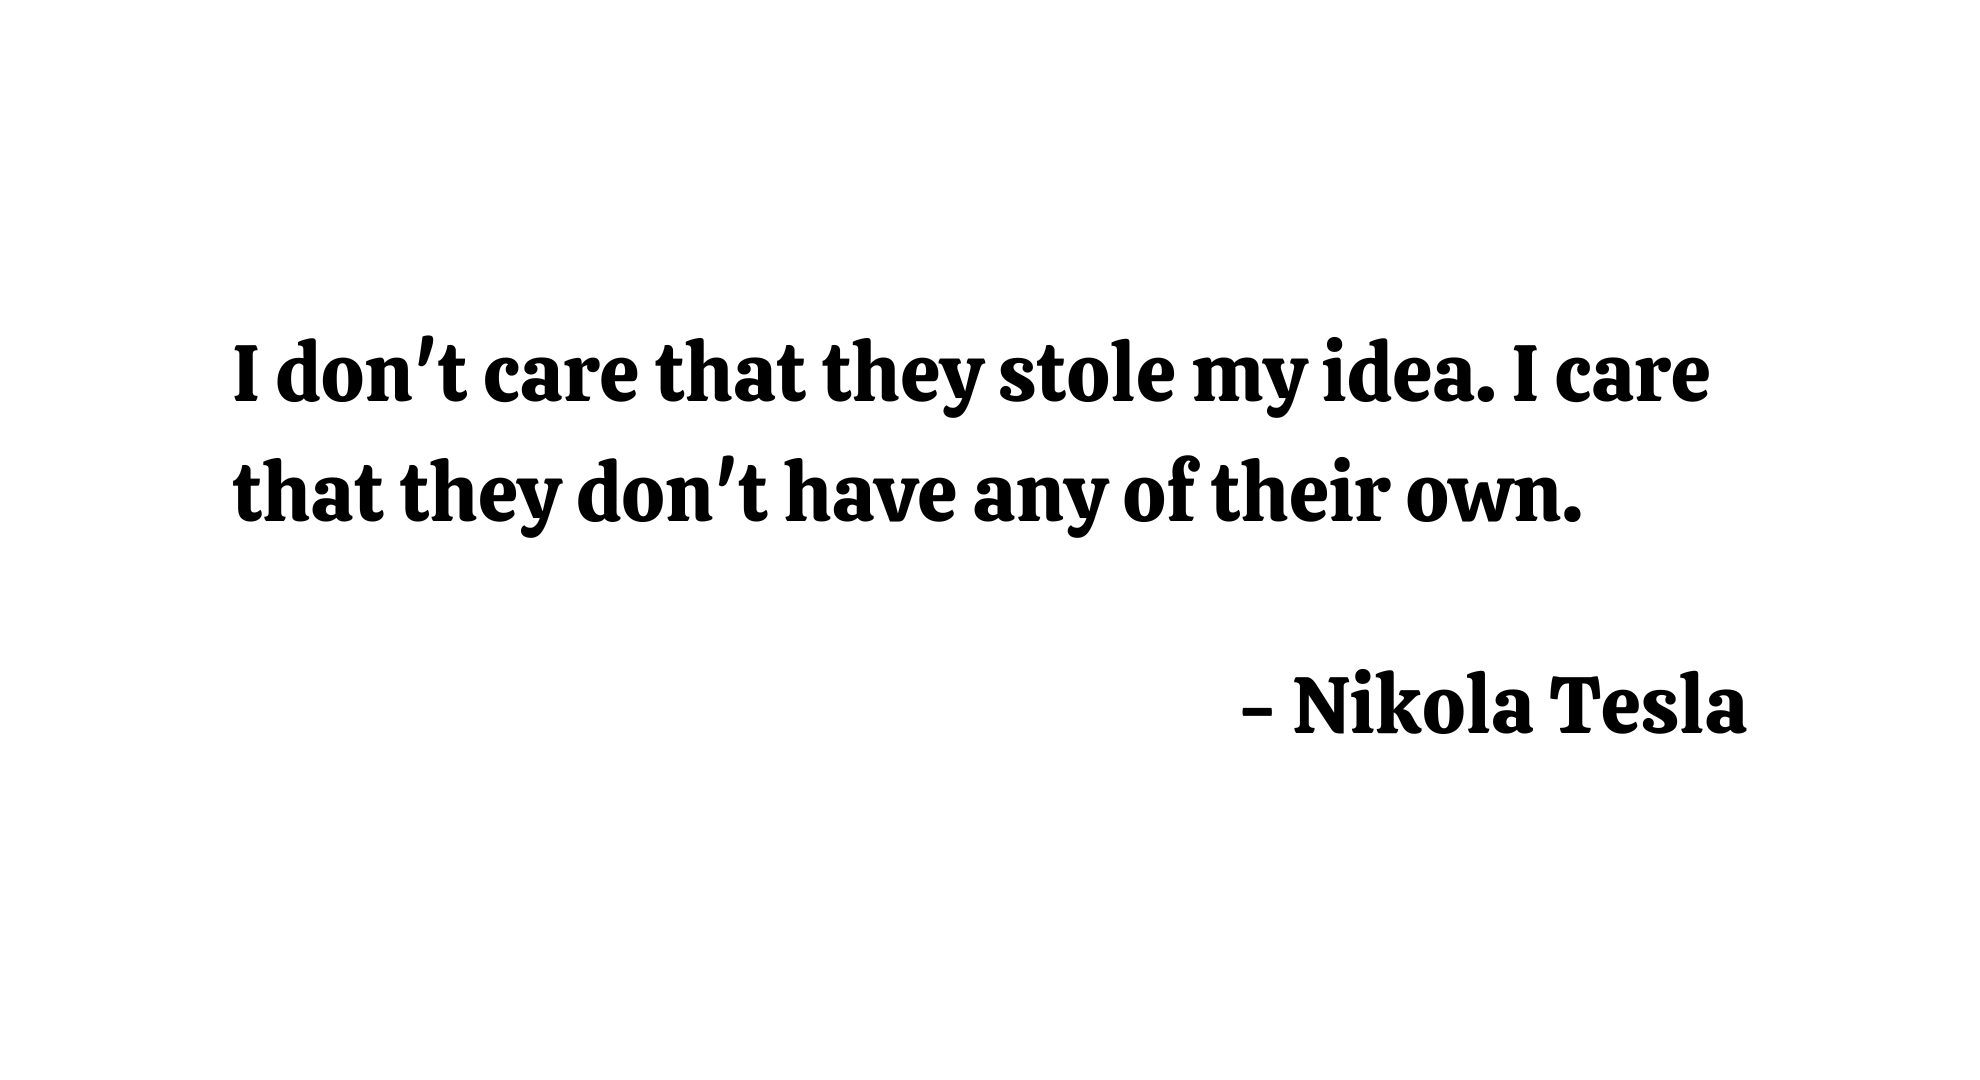 I don't care that they stole my idea. I care that they don't have any of their own. - Nikola Tesla